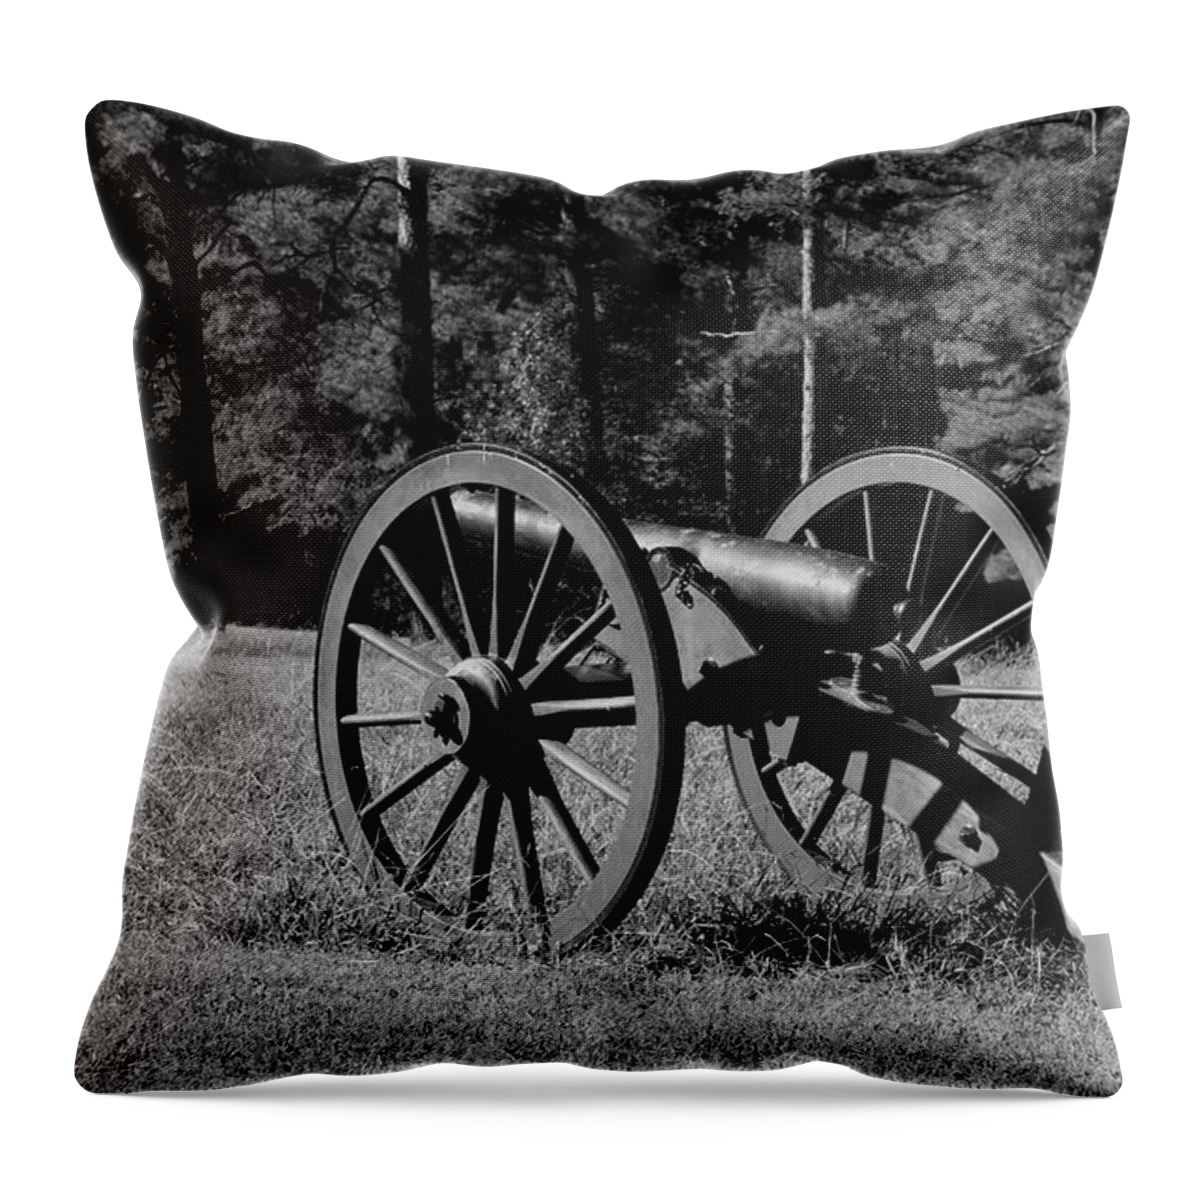 Canon Throw Pillow featuring the photograph Of Years Gone By by Karen Harrison Brown